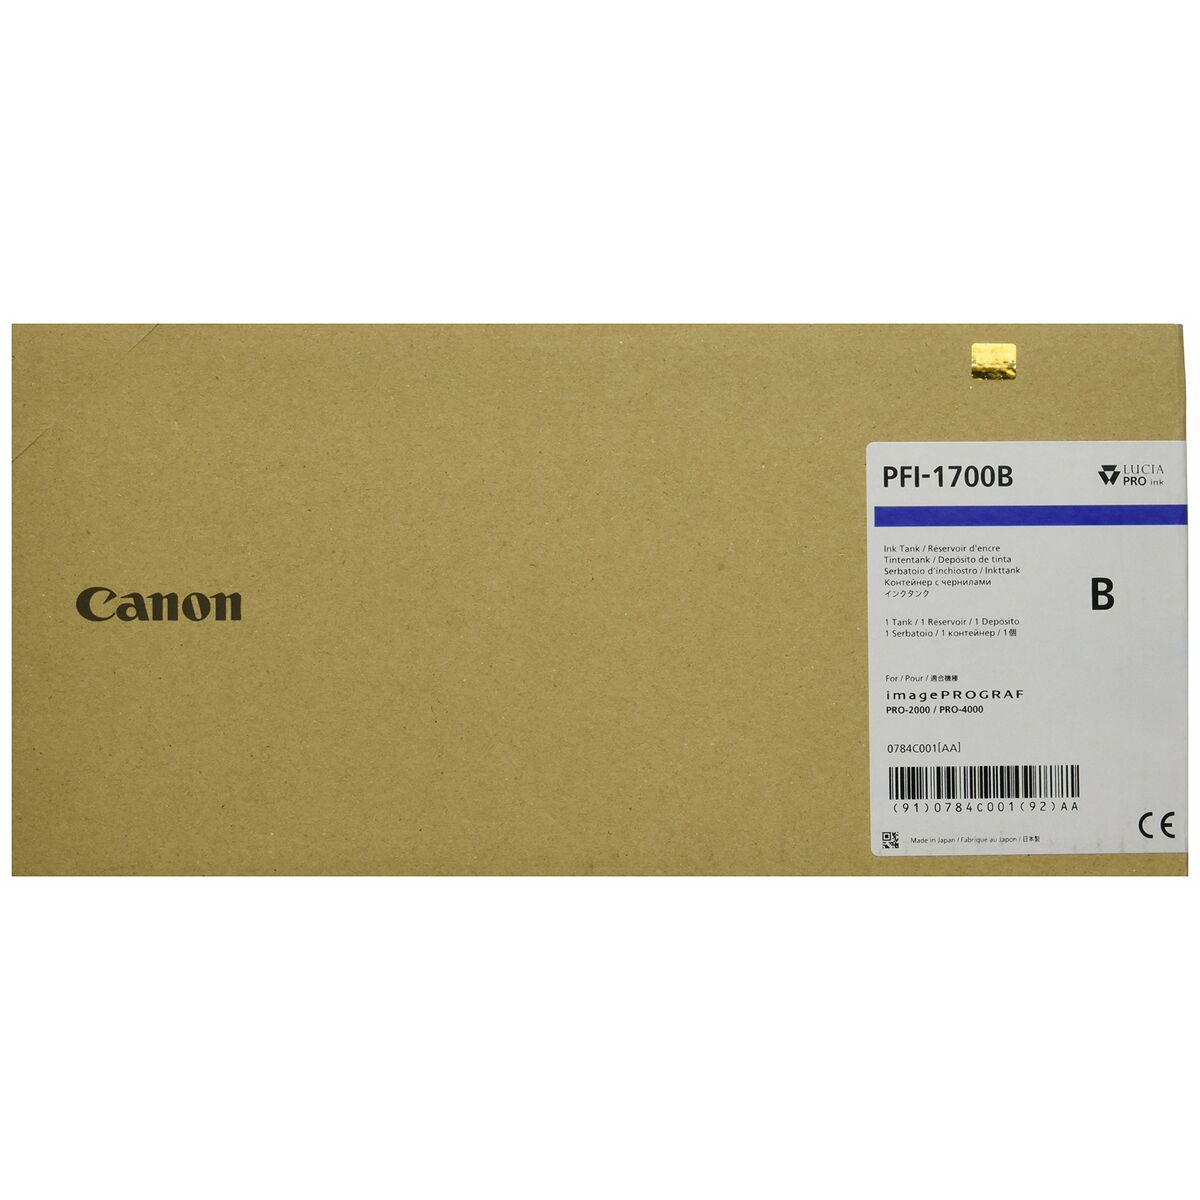 Original Ink Cartridge Canon 0784C001AA Blue, Canon, Computing, Printers and accessories, original-ink-cartridge-canon-0784c001aa-blue, Brand_Canon, category-reference-2609, category-reference-2642, category-reference-2645, category-reference-t-19685, category-reference-t-19911, category-reference-t-21378, category-reference-t-25693, computers / peripherals, Condition_NEW, office, Price_300 - 400, Teleworking, RiotNook